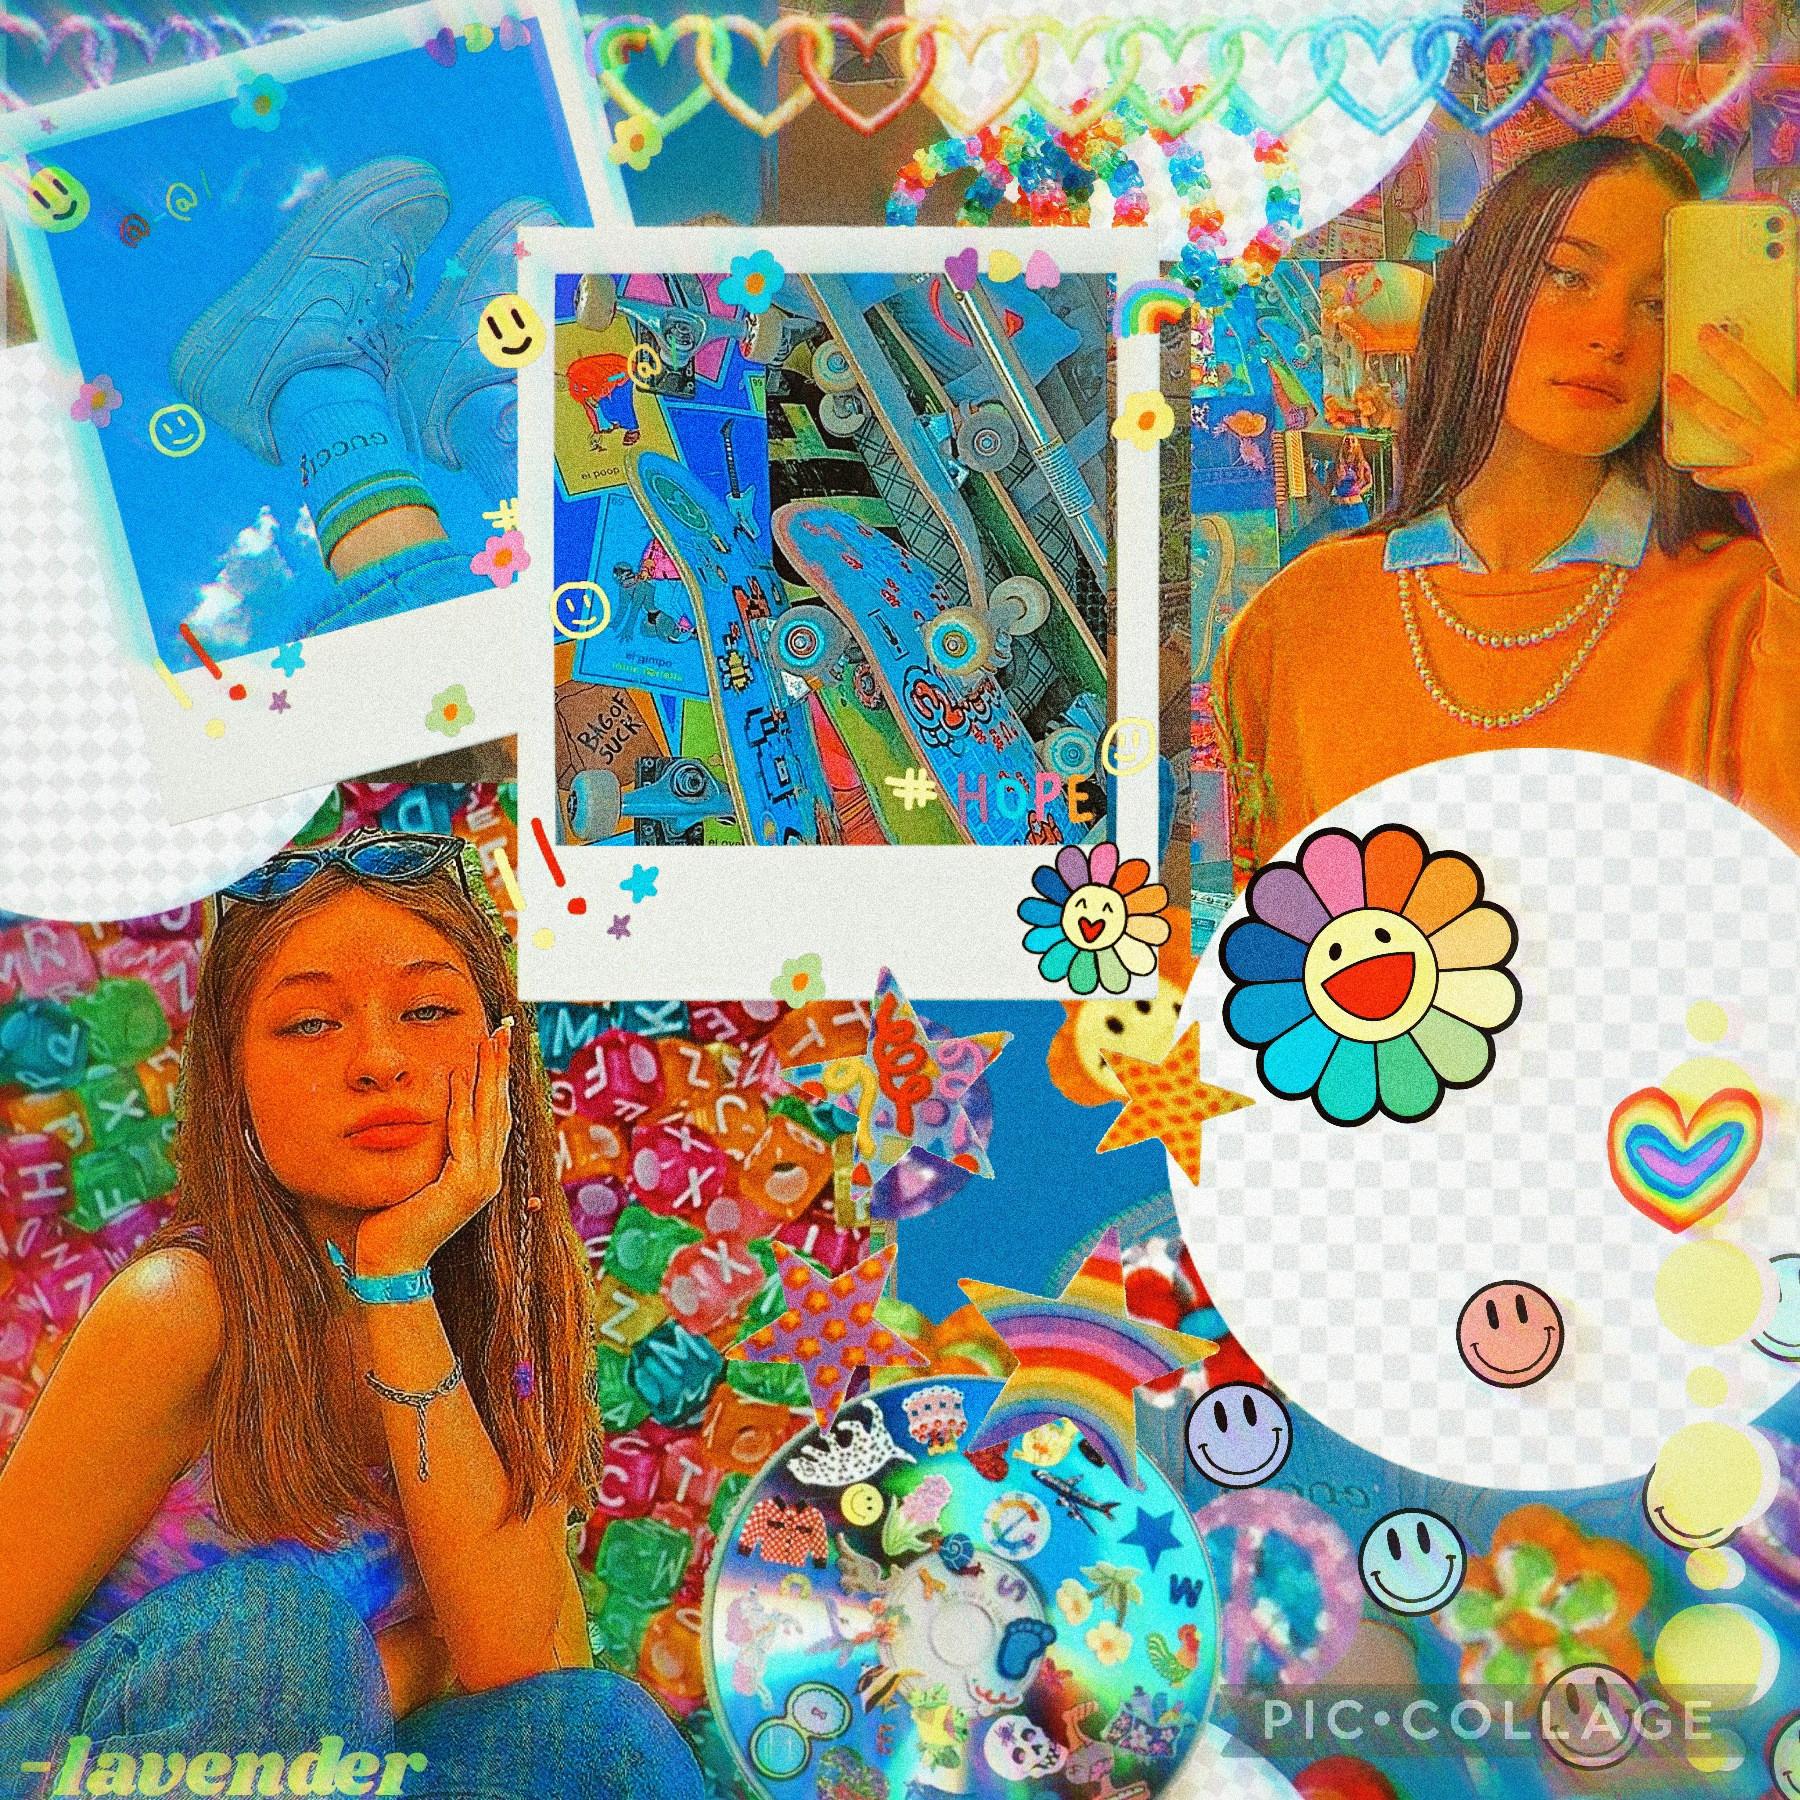 🌈New kidcore collage(tap)🌈
Hey guys! Since I reached 1000 followers the other day I wanted to do something special! it could be a contest or icons, collabs, reviews lmk by commenting or remixing!
have a great day 💖
❤ -lavender